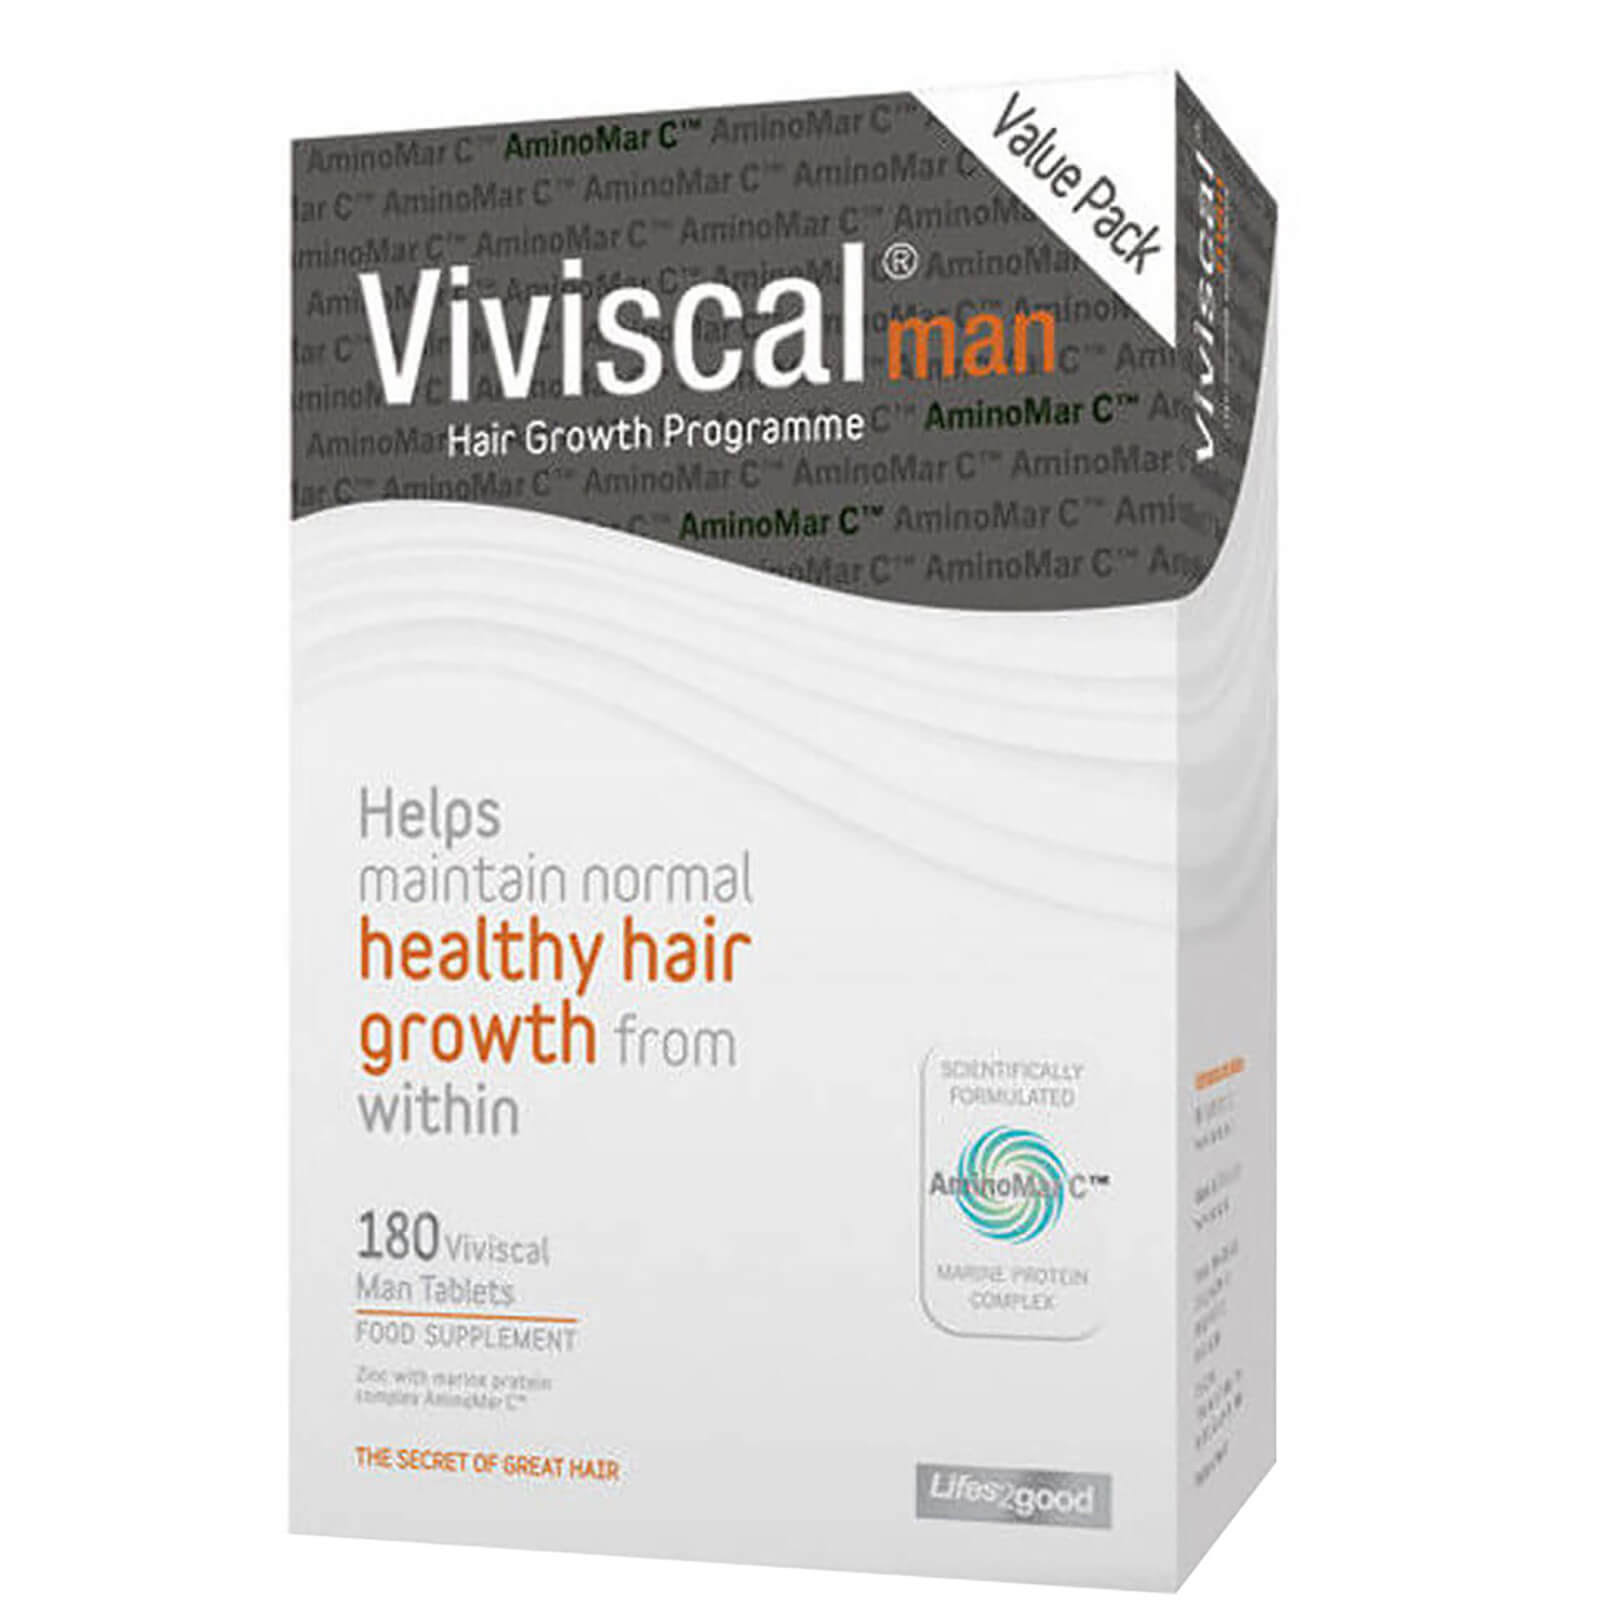 Viviscal Man 180 Tablets 3 Month Supply